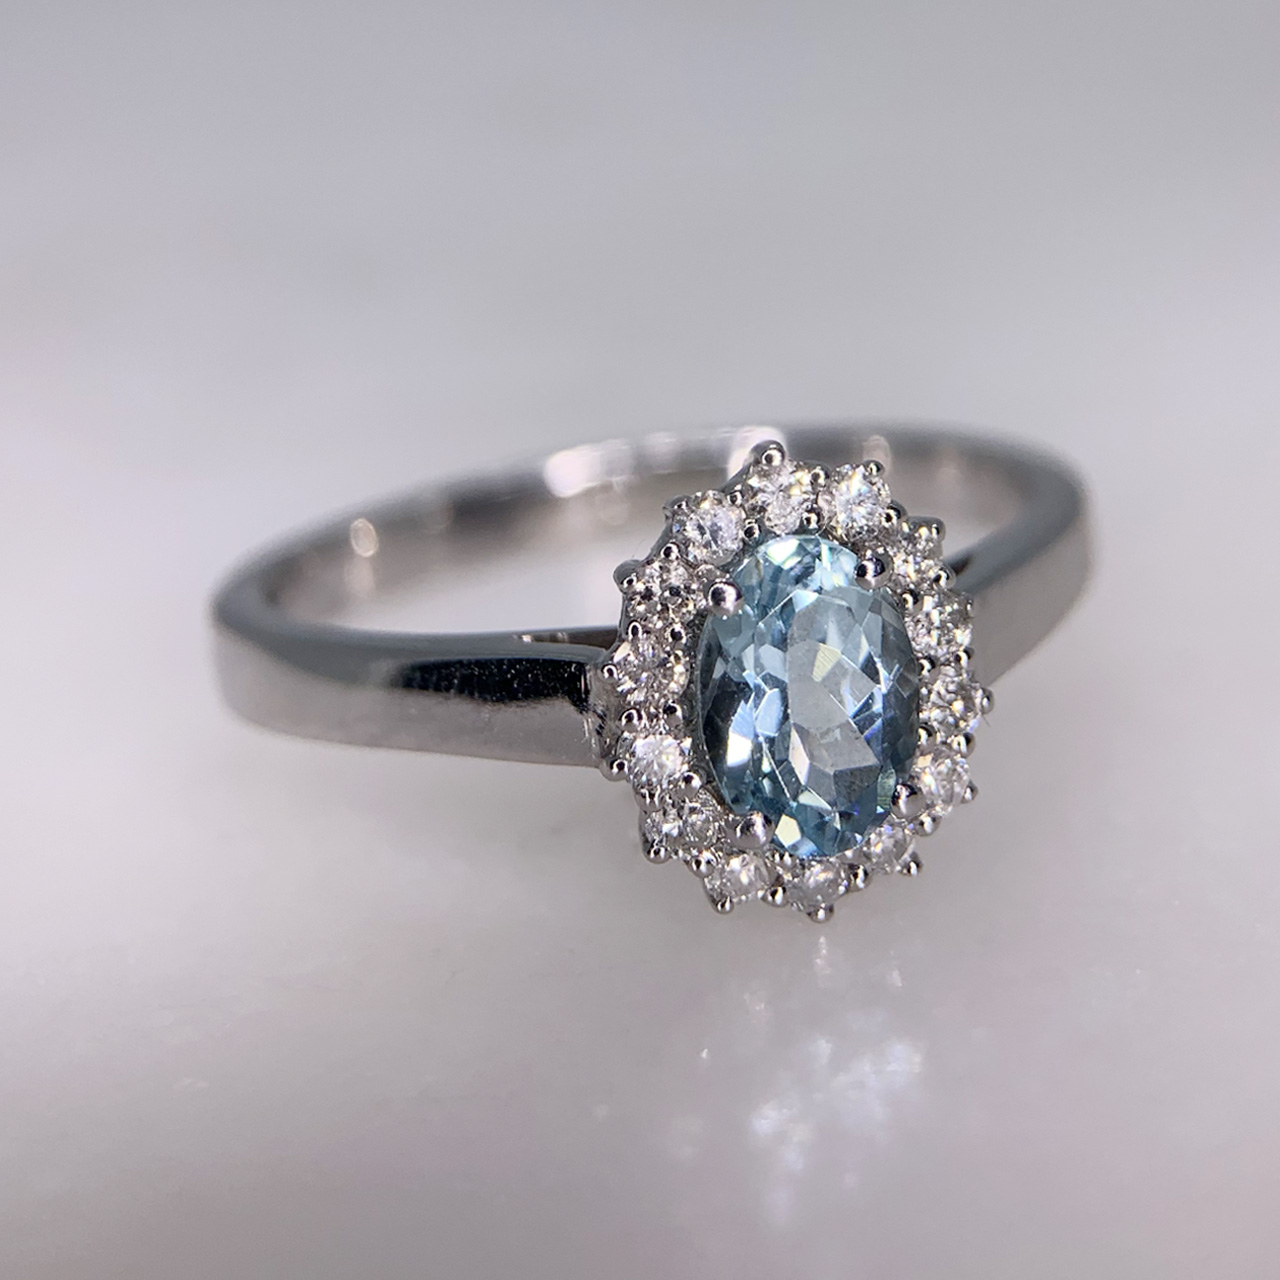 Diamond and Aquamarine White Gold Cluster, Hallmarked 9ct, London. Central Aquamarine, 6.8mm X 4.9mm surrounded by 14 brilliant cut diamonds.